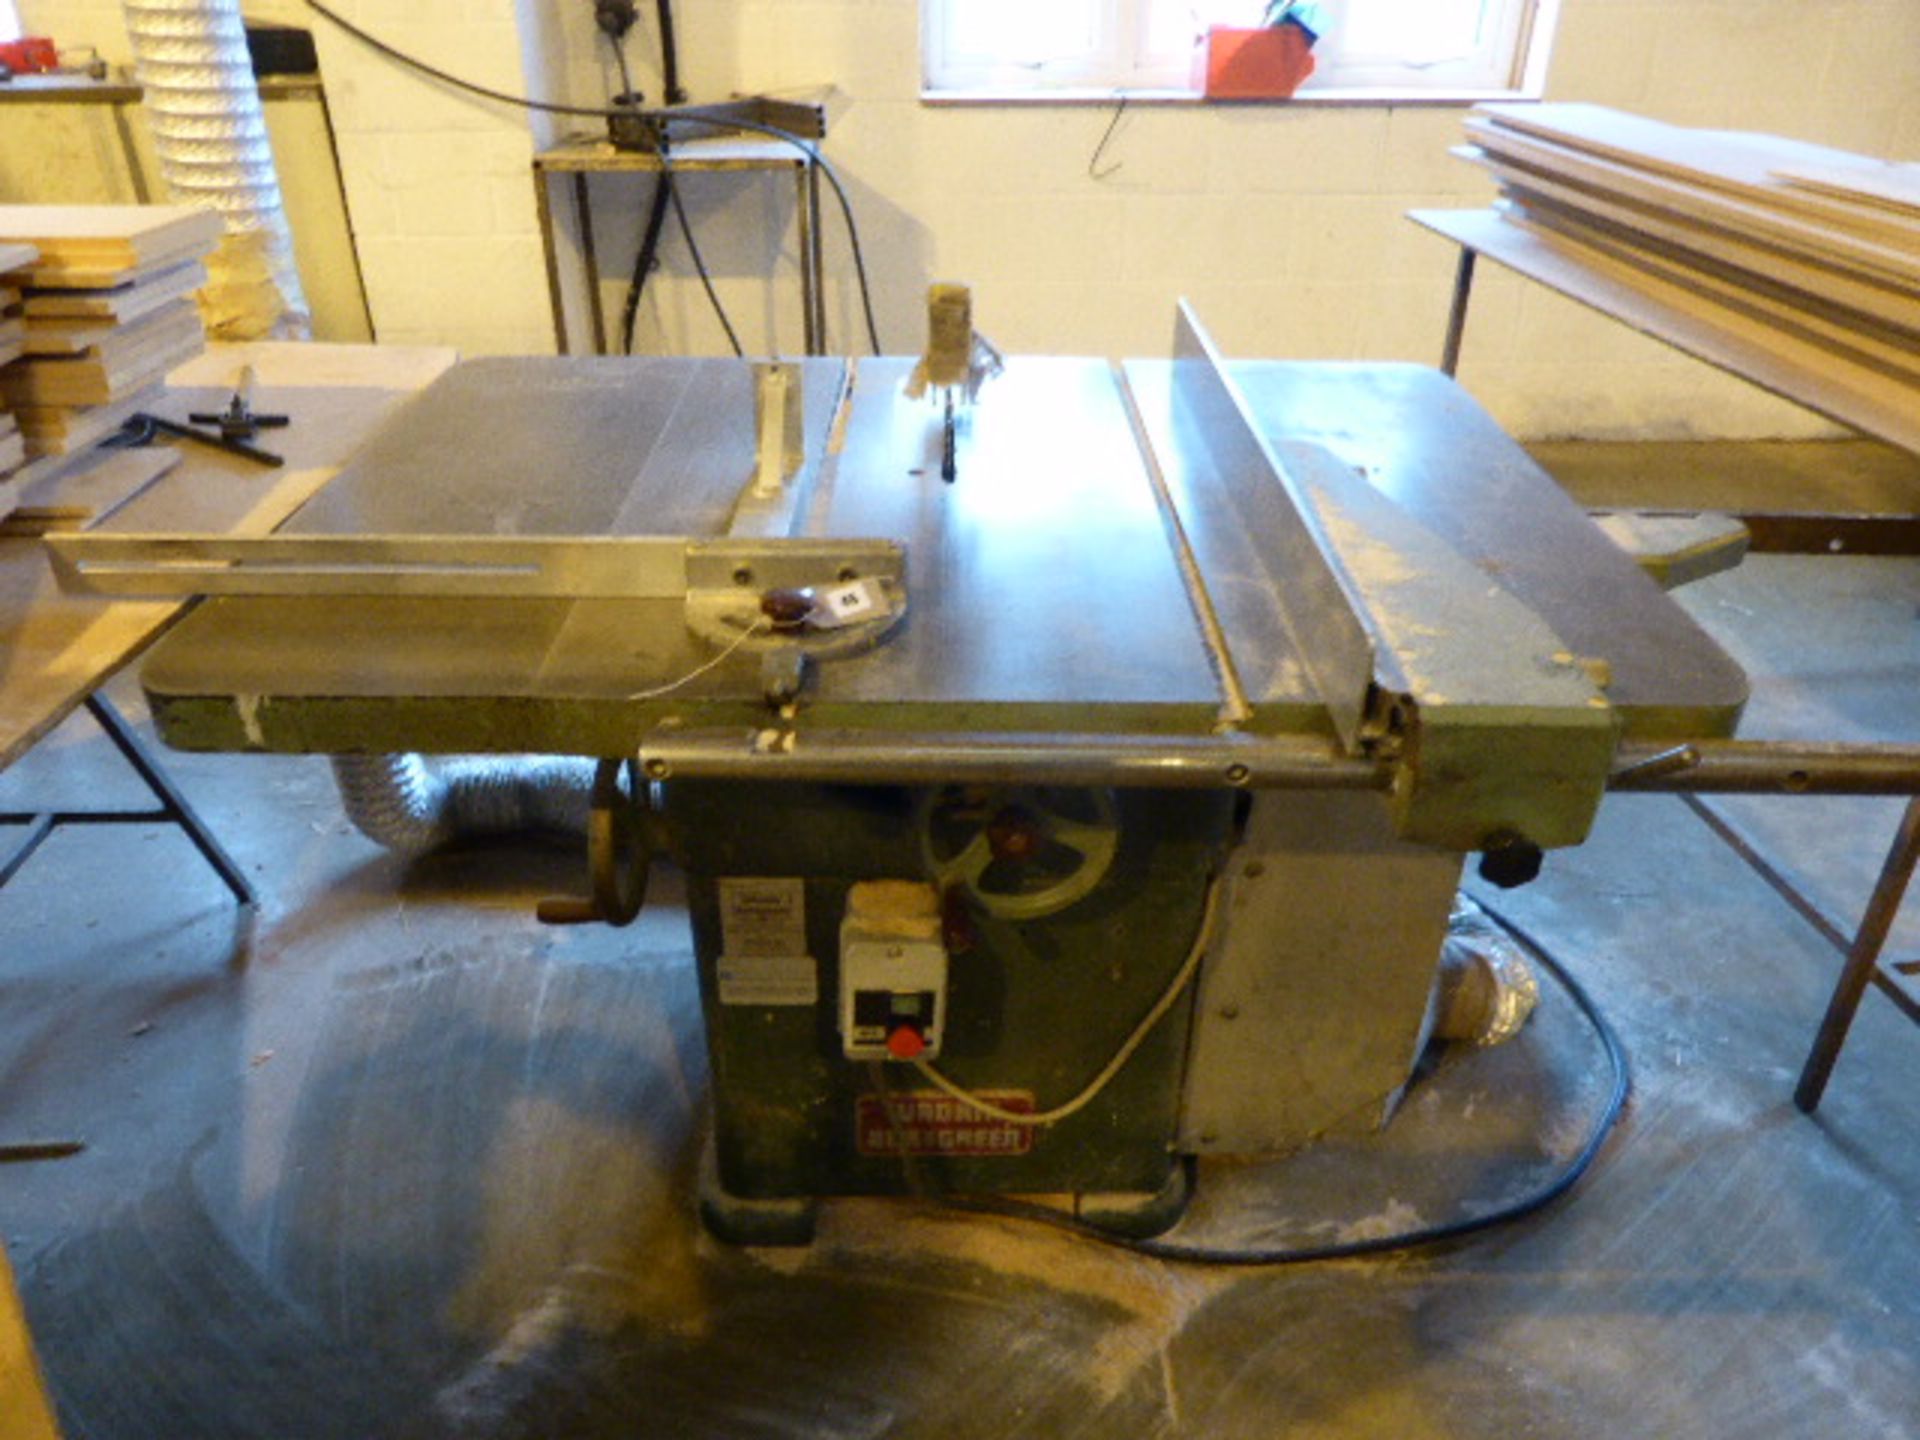 Wadkin Bursgreen 12AGS tilt arbour table saw, serial no: 77790, 3 phase electric